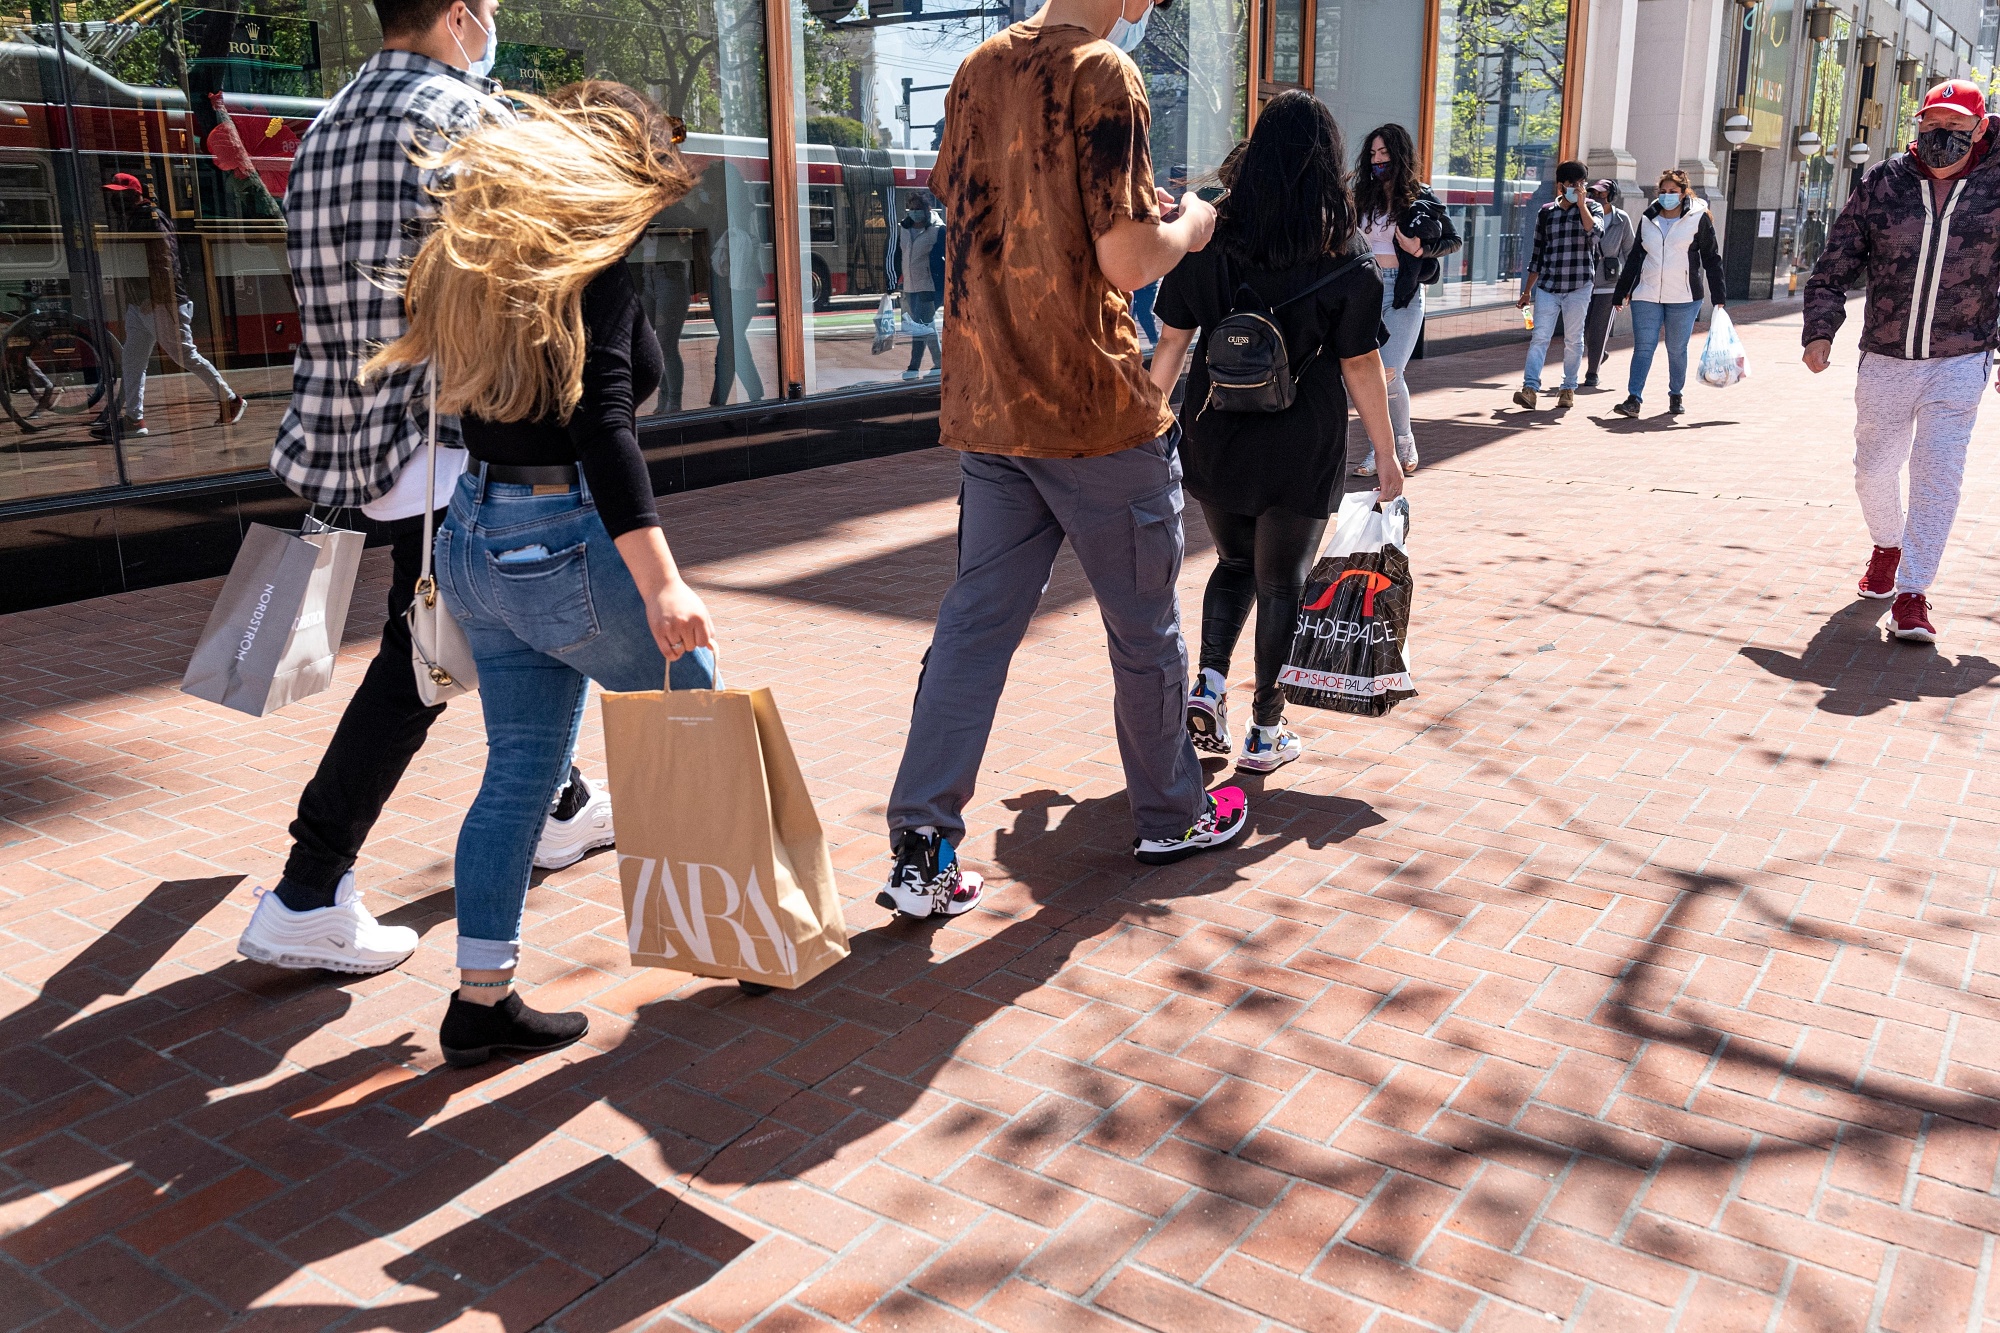 Shoppers As Some Economists Project 'Spectacular' U.S. March Retail Report